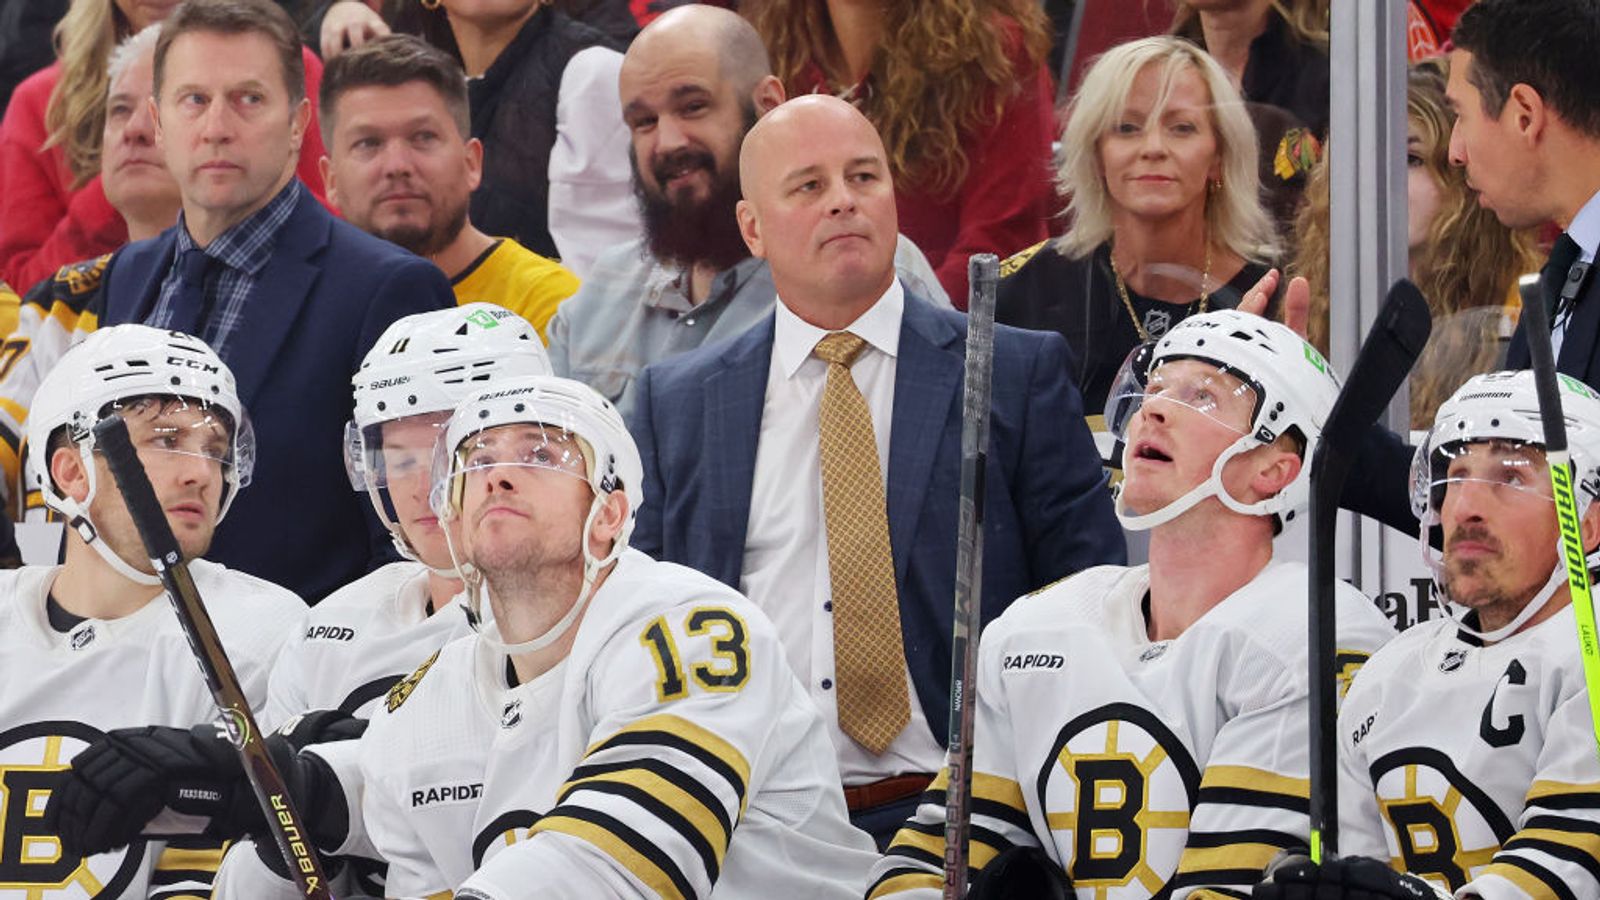 Haggerty: There's Something Special About These Boston Bruins